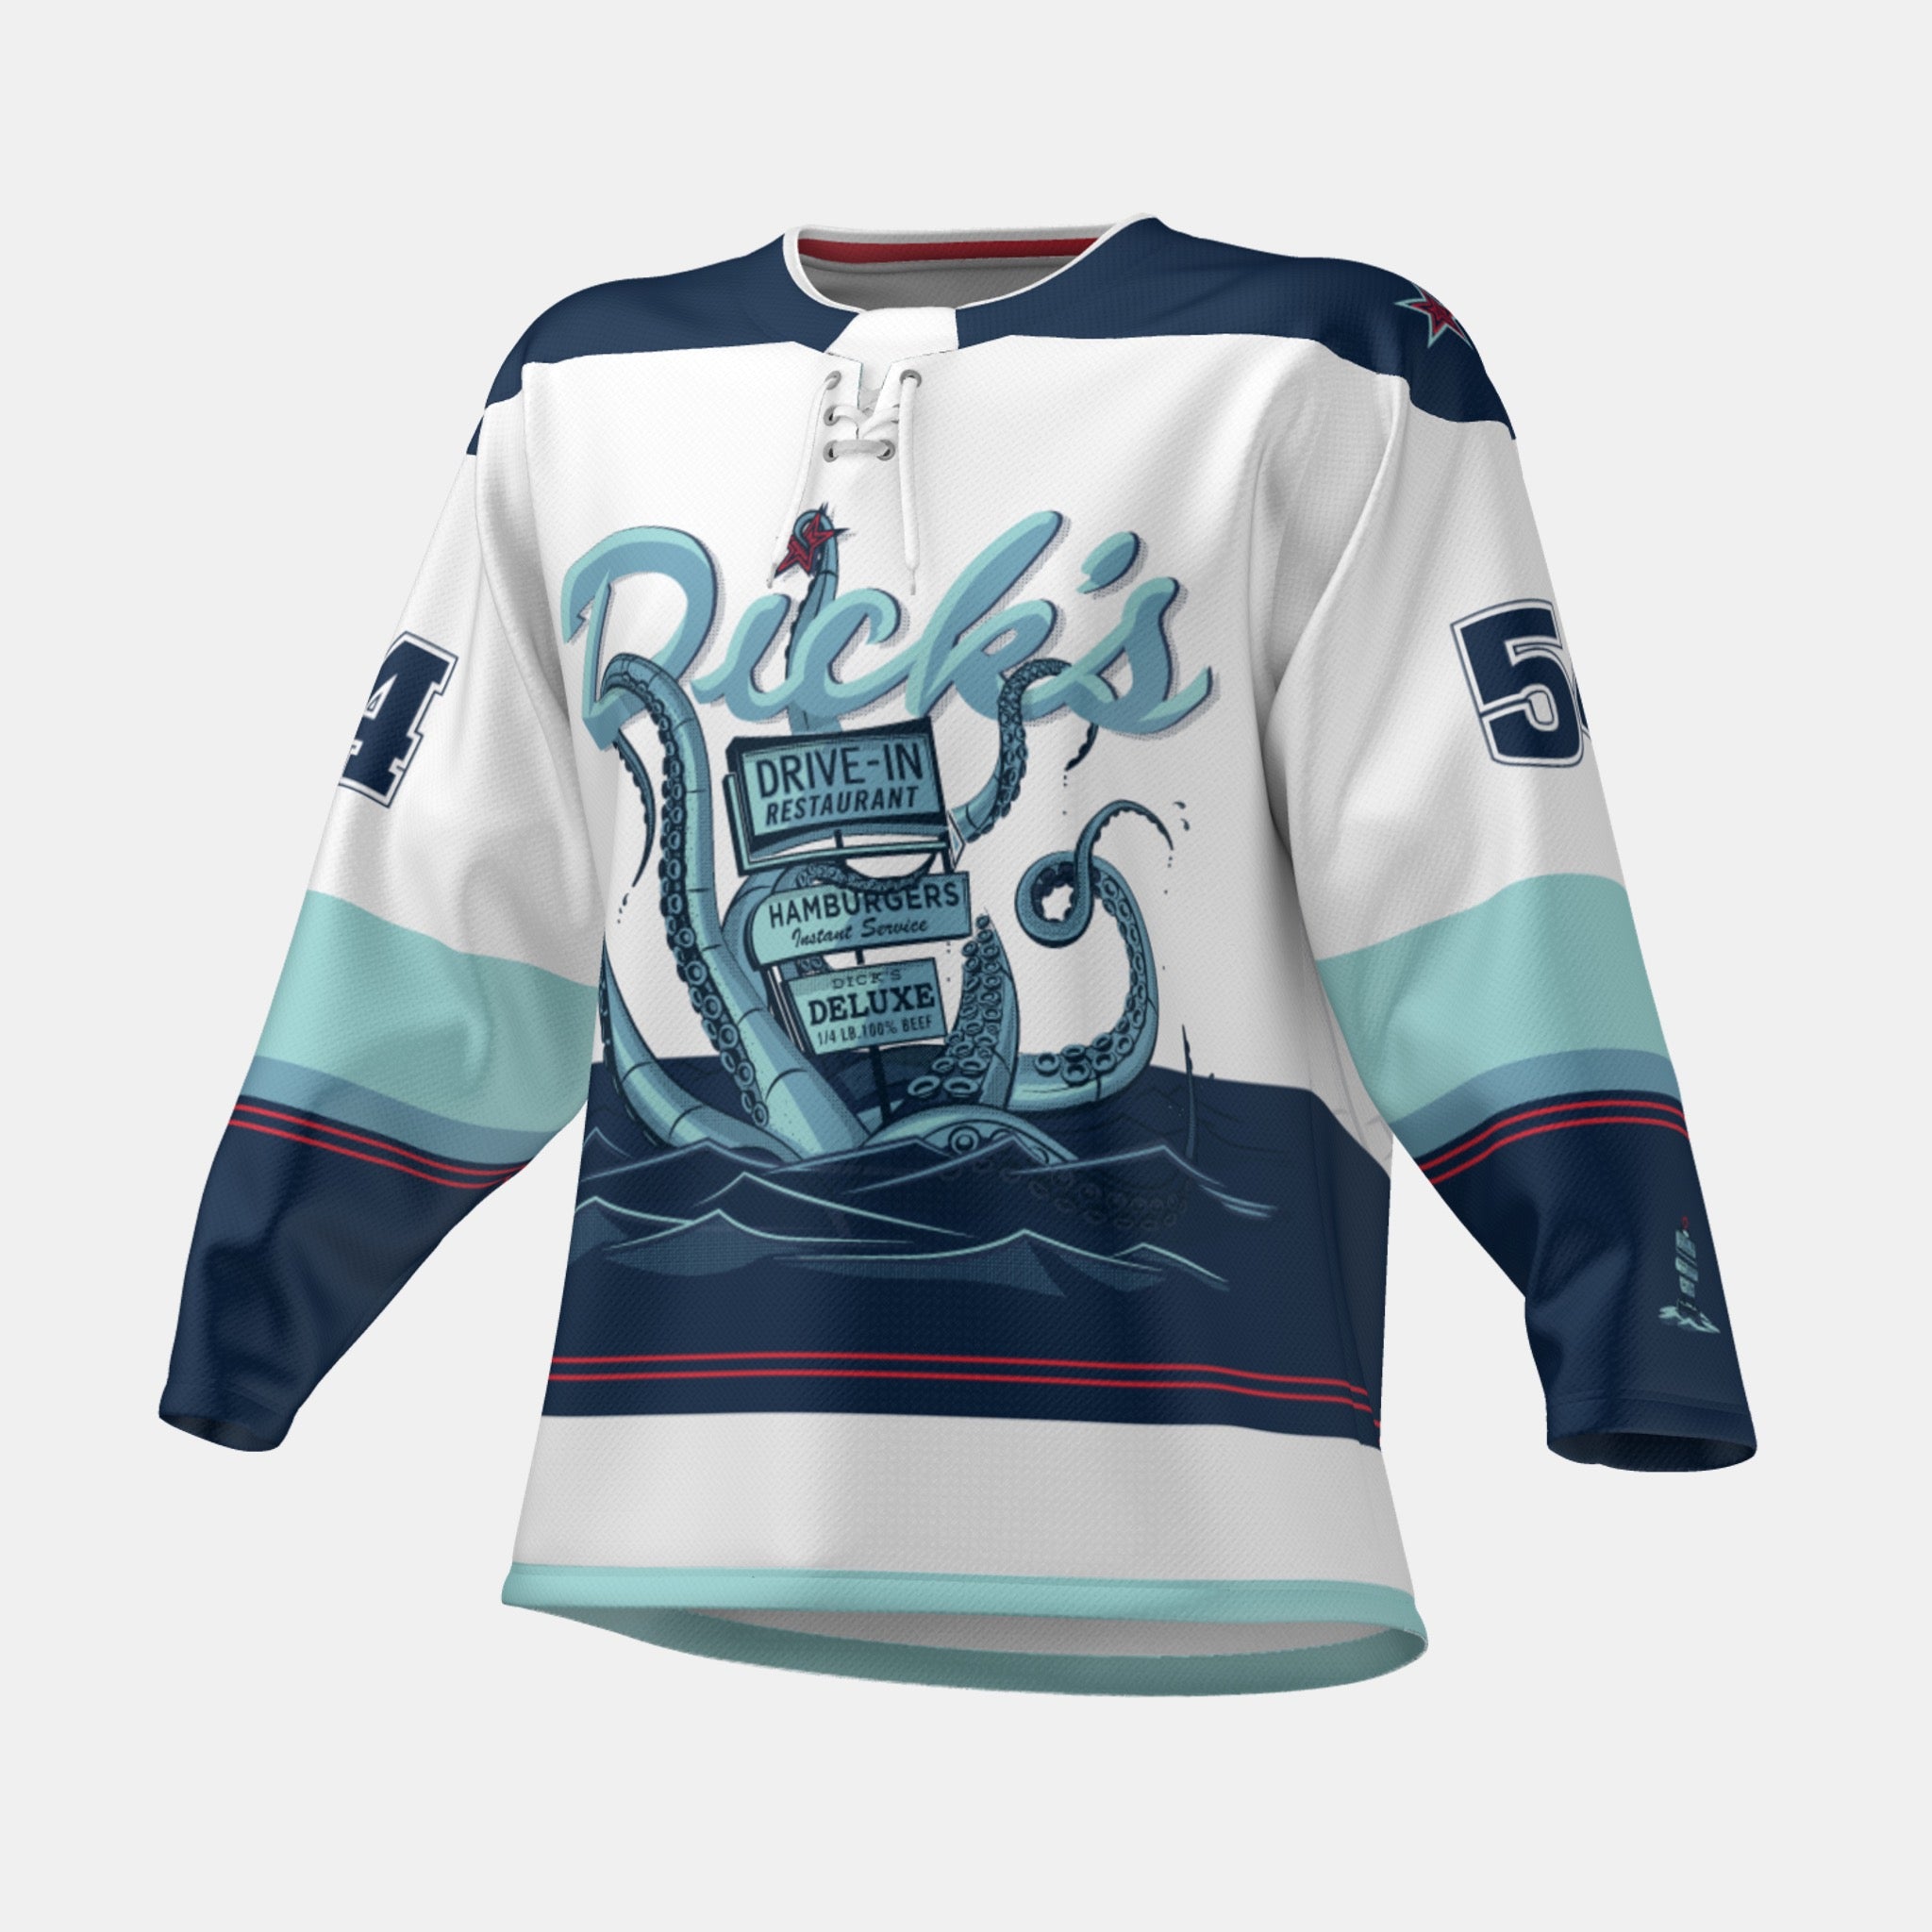 Seattle Kraken Dick's Drive In jersey variant arrived today!!! I